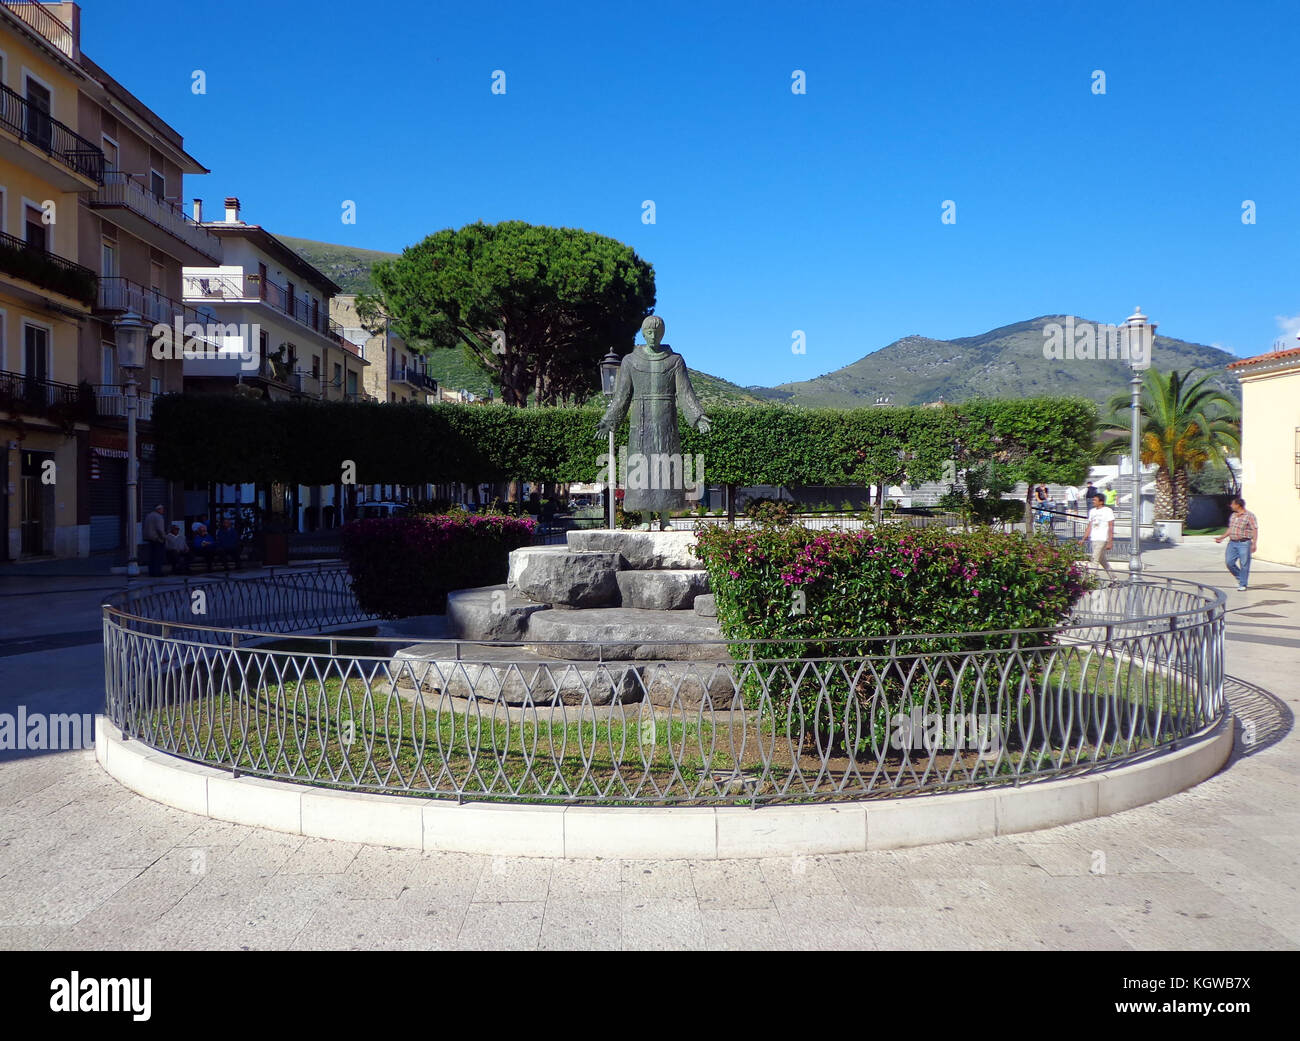 Fondi, Italy - 10 june 2013: IV Novembre square near the convent of St. Francis.. Fondi's urban core is located in the south pontino halfway between R Stock Photo